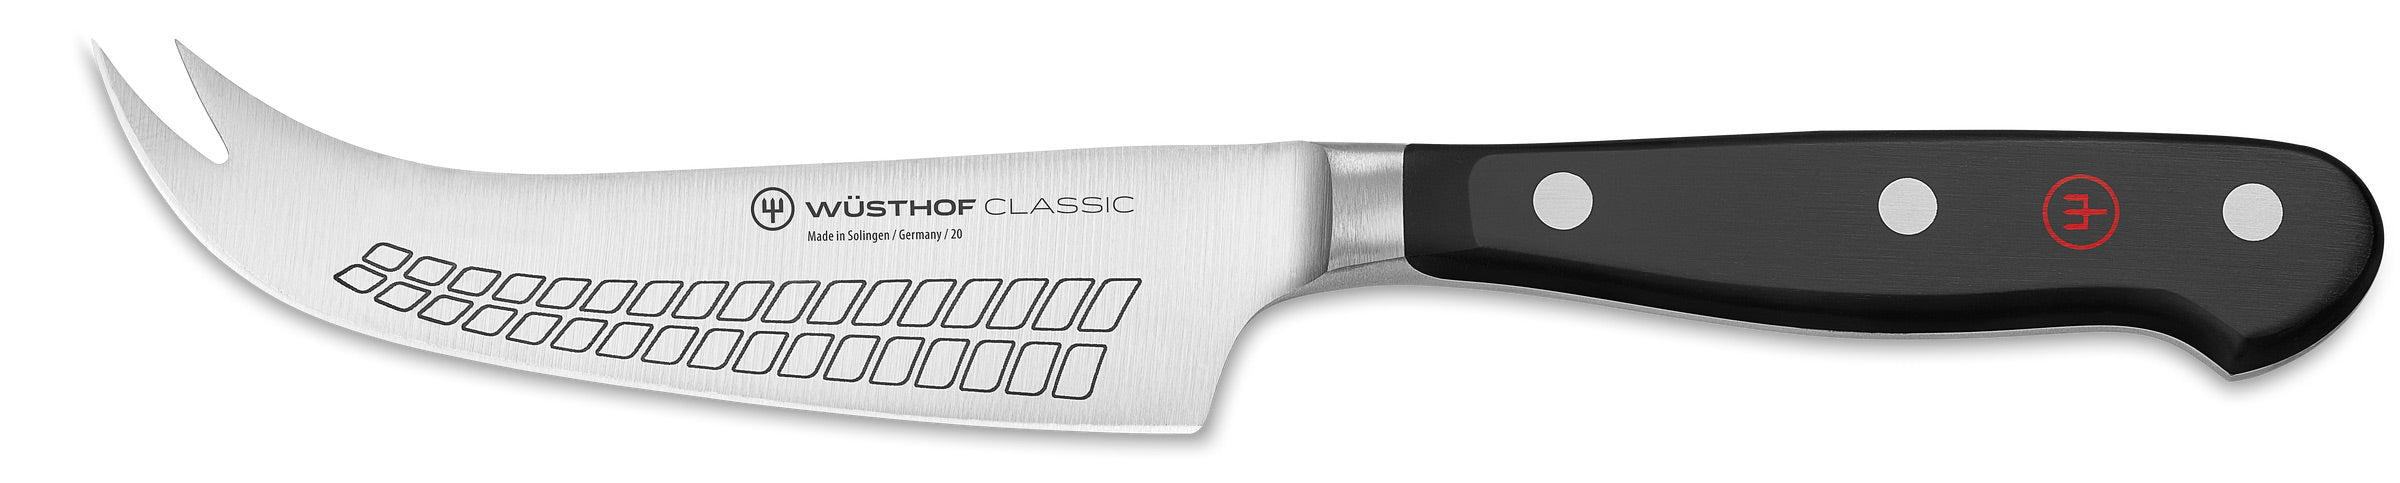 Wüsthof Classic Cheese knife, ref: 3103/14